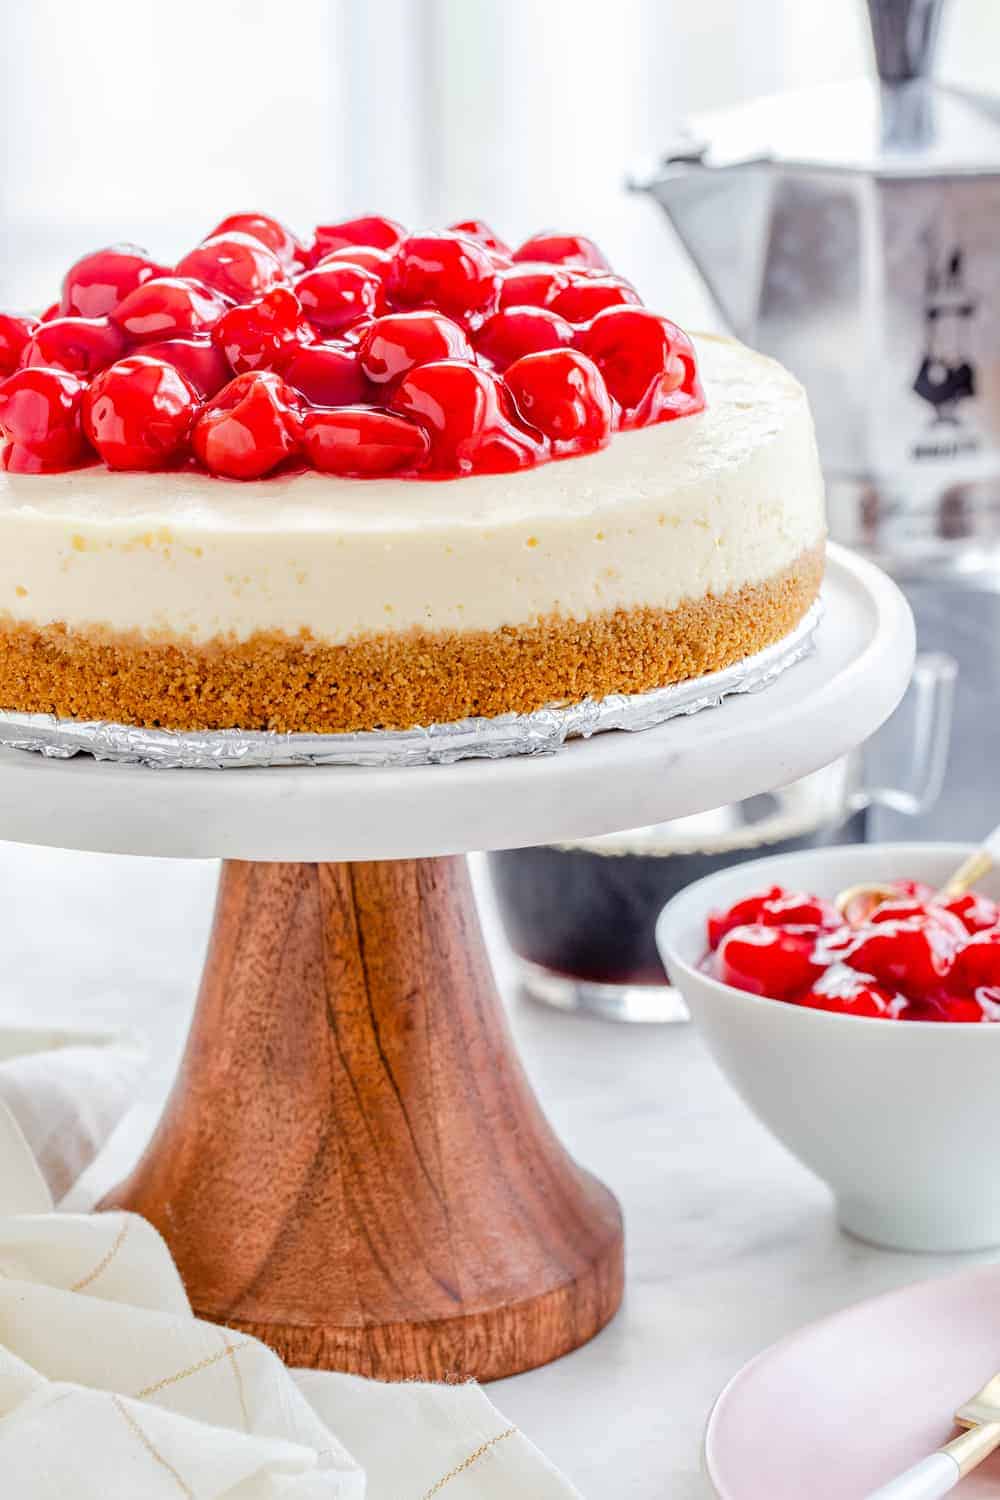 Instant Pot Cheesecake comes together with ease. This recipe is delicious and foolproof!